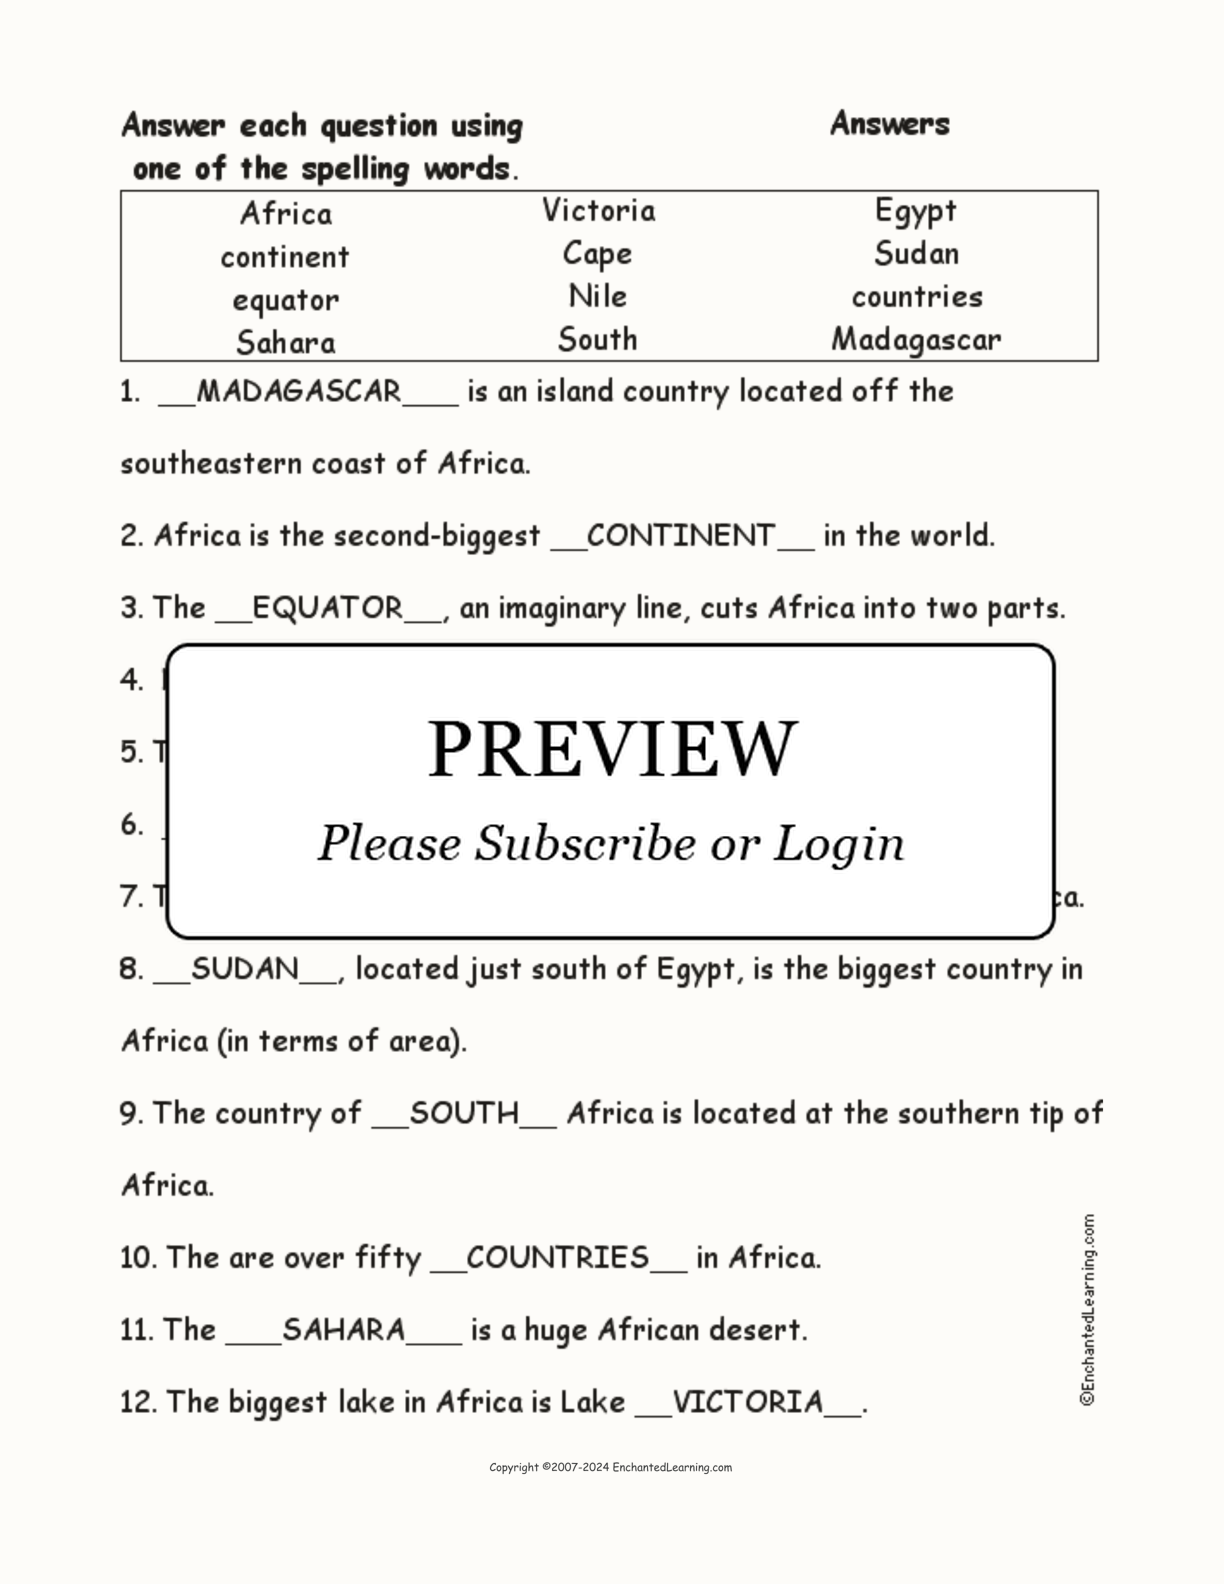 African Spelling Word Questions interactive worksheet page 2